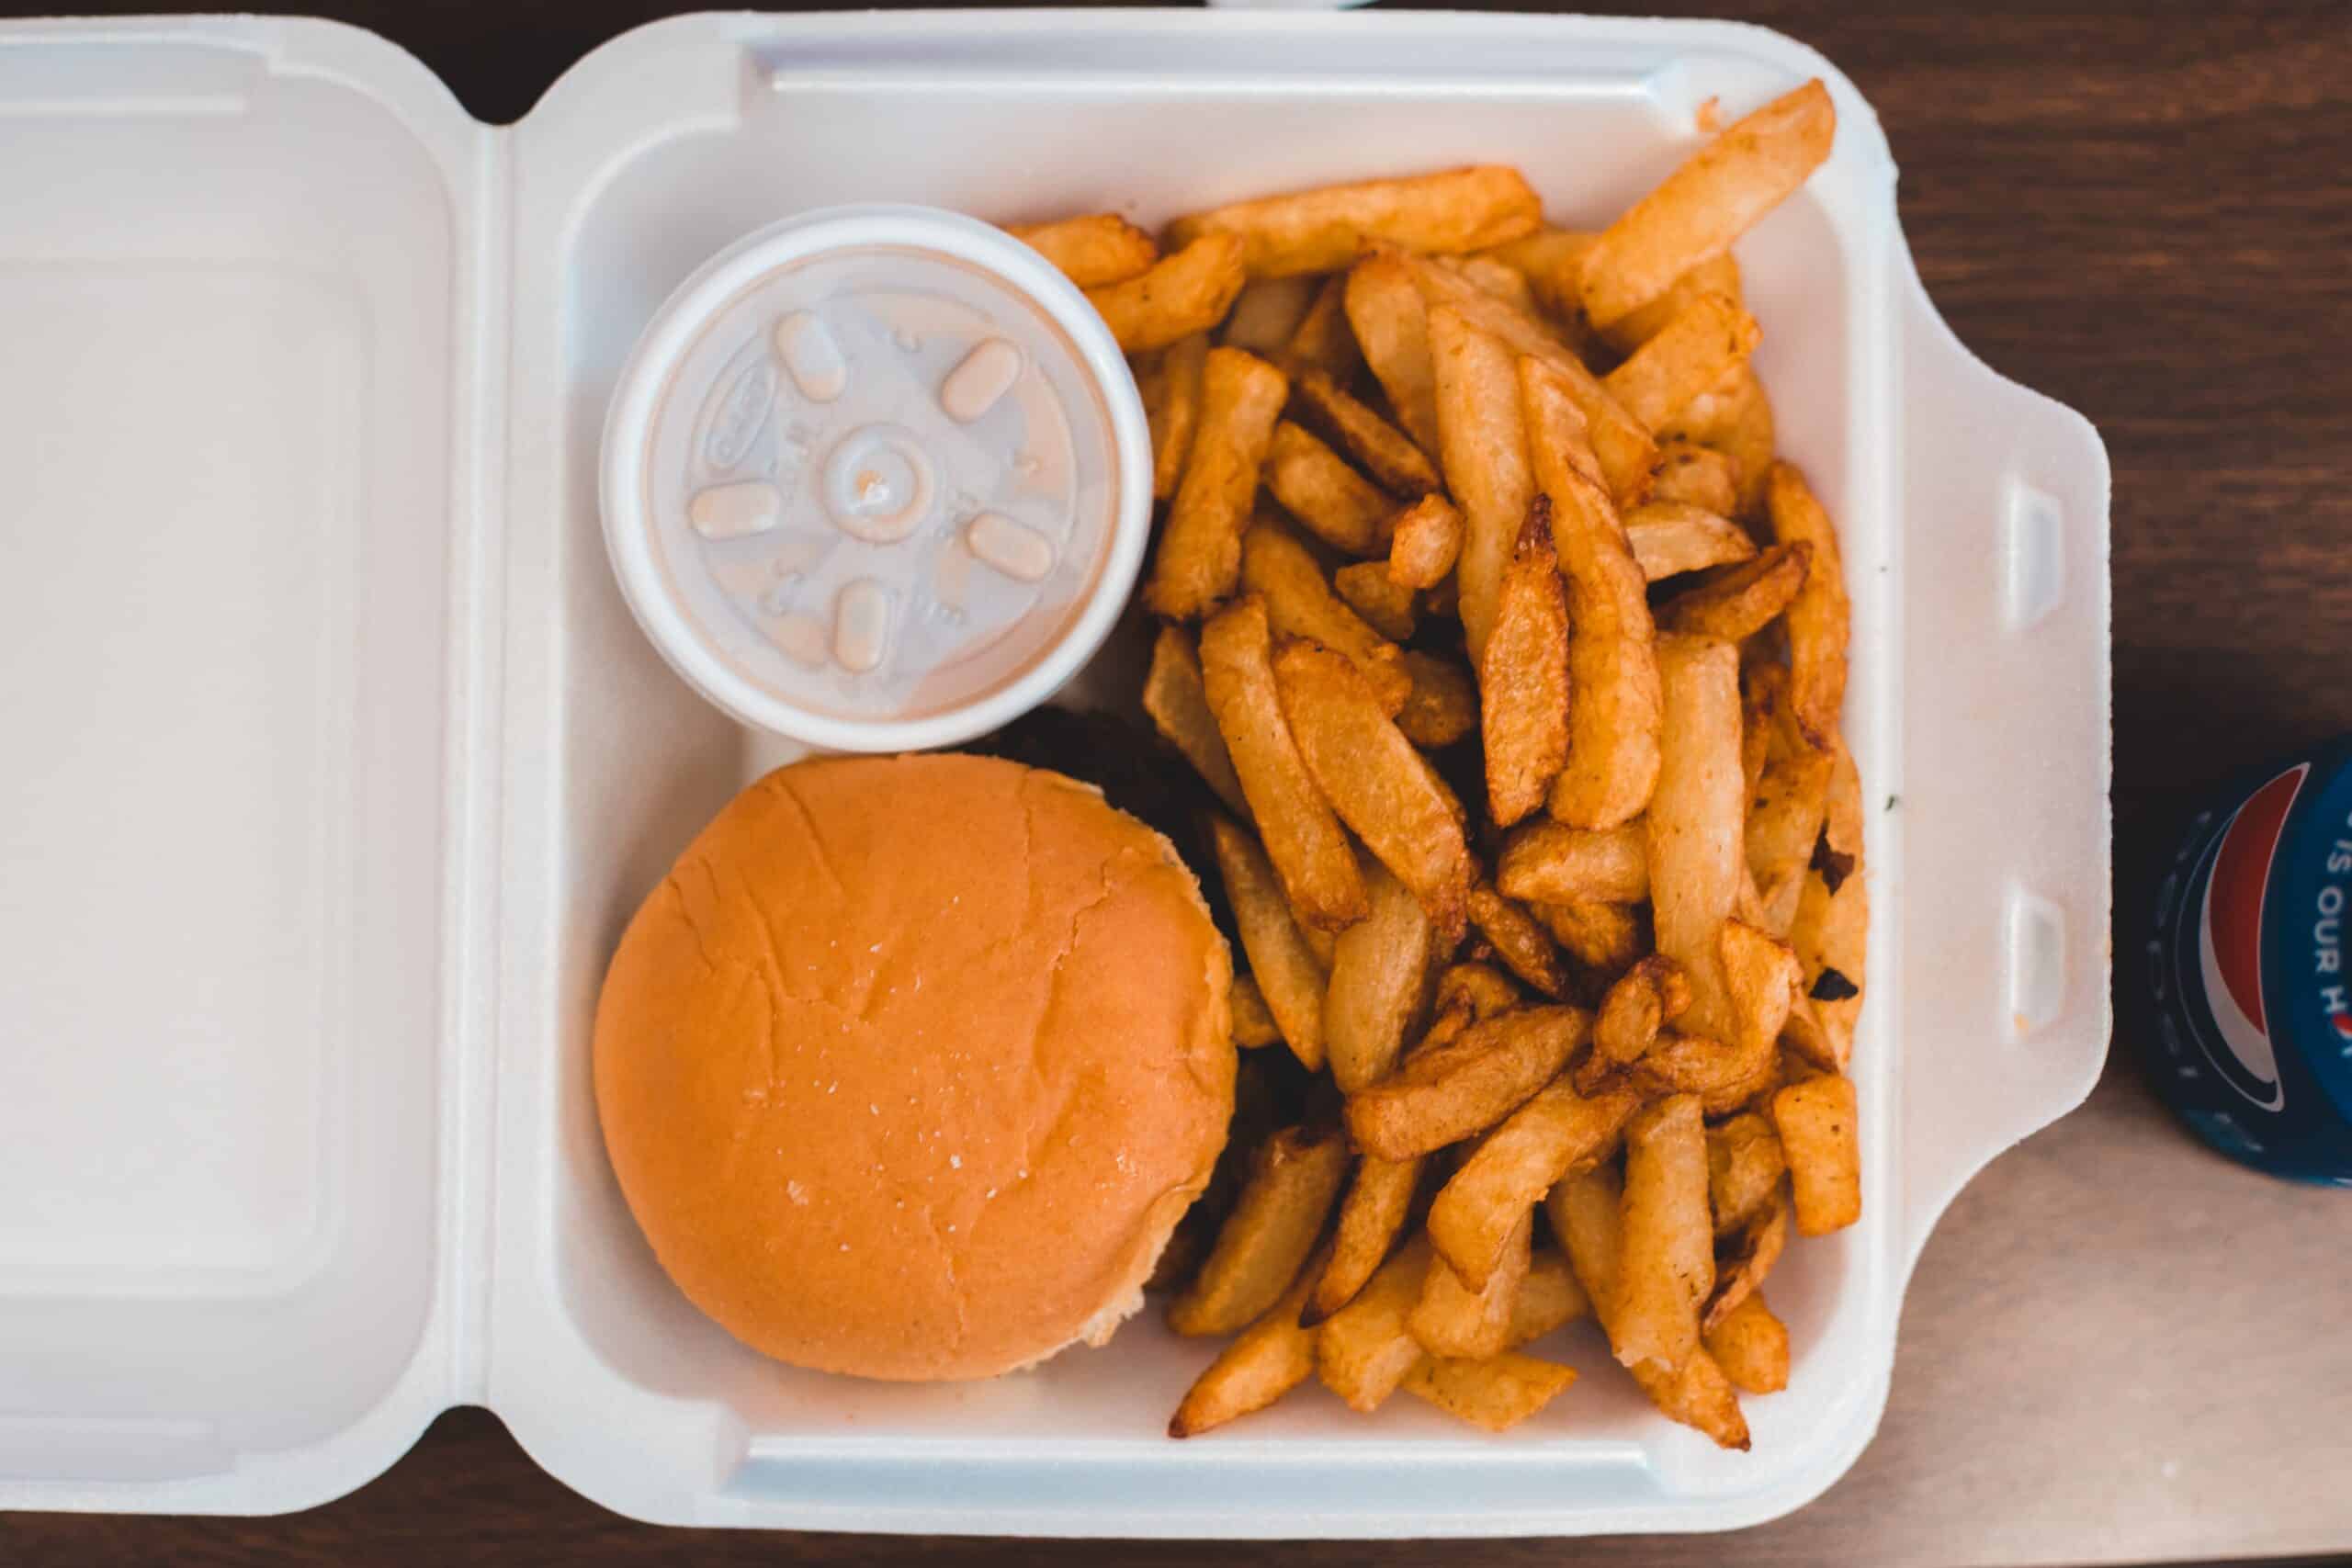 SAVRPak created food packets to prevent soggy delivery French fries - The  Washington Post